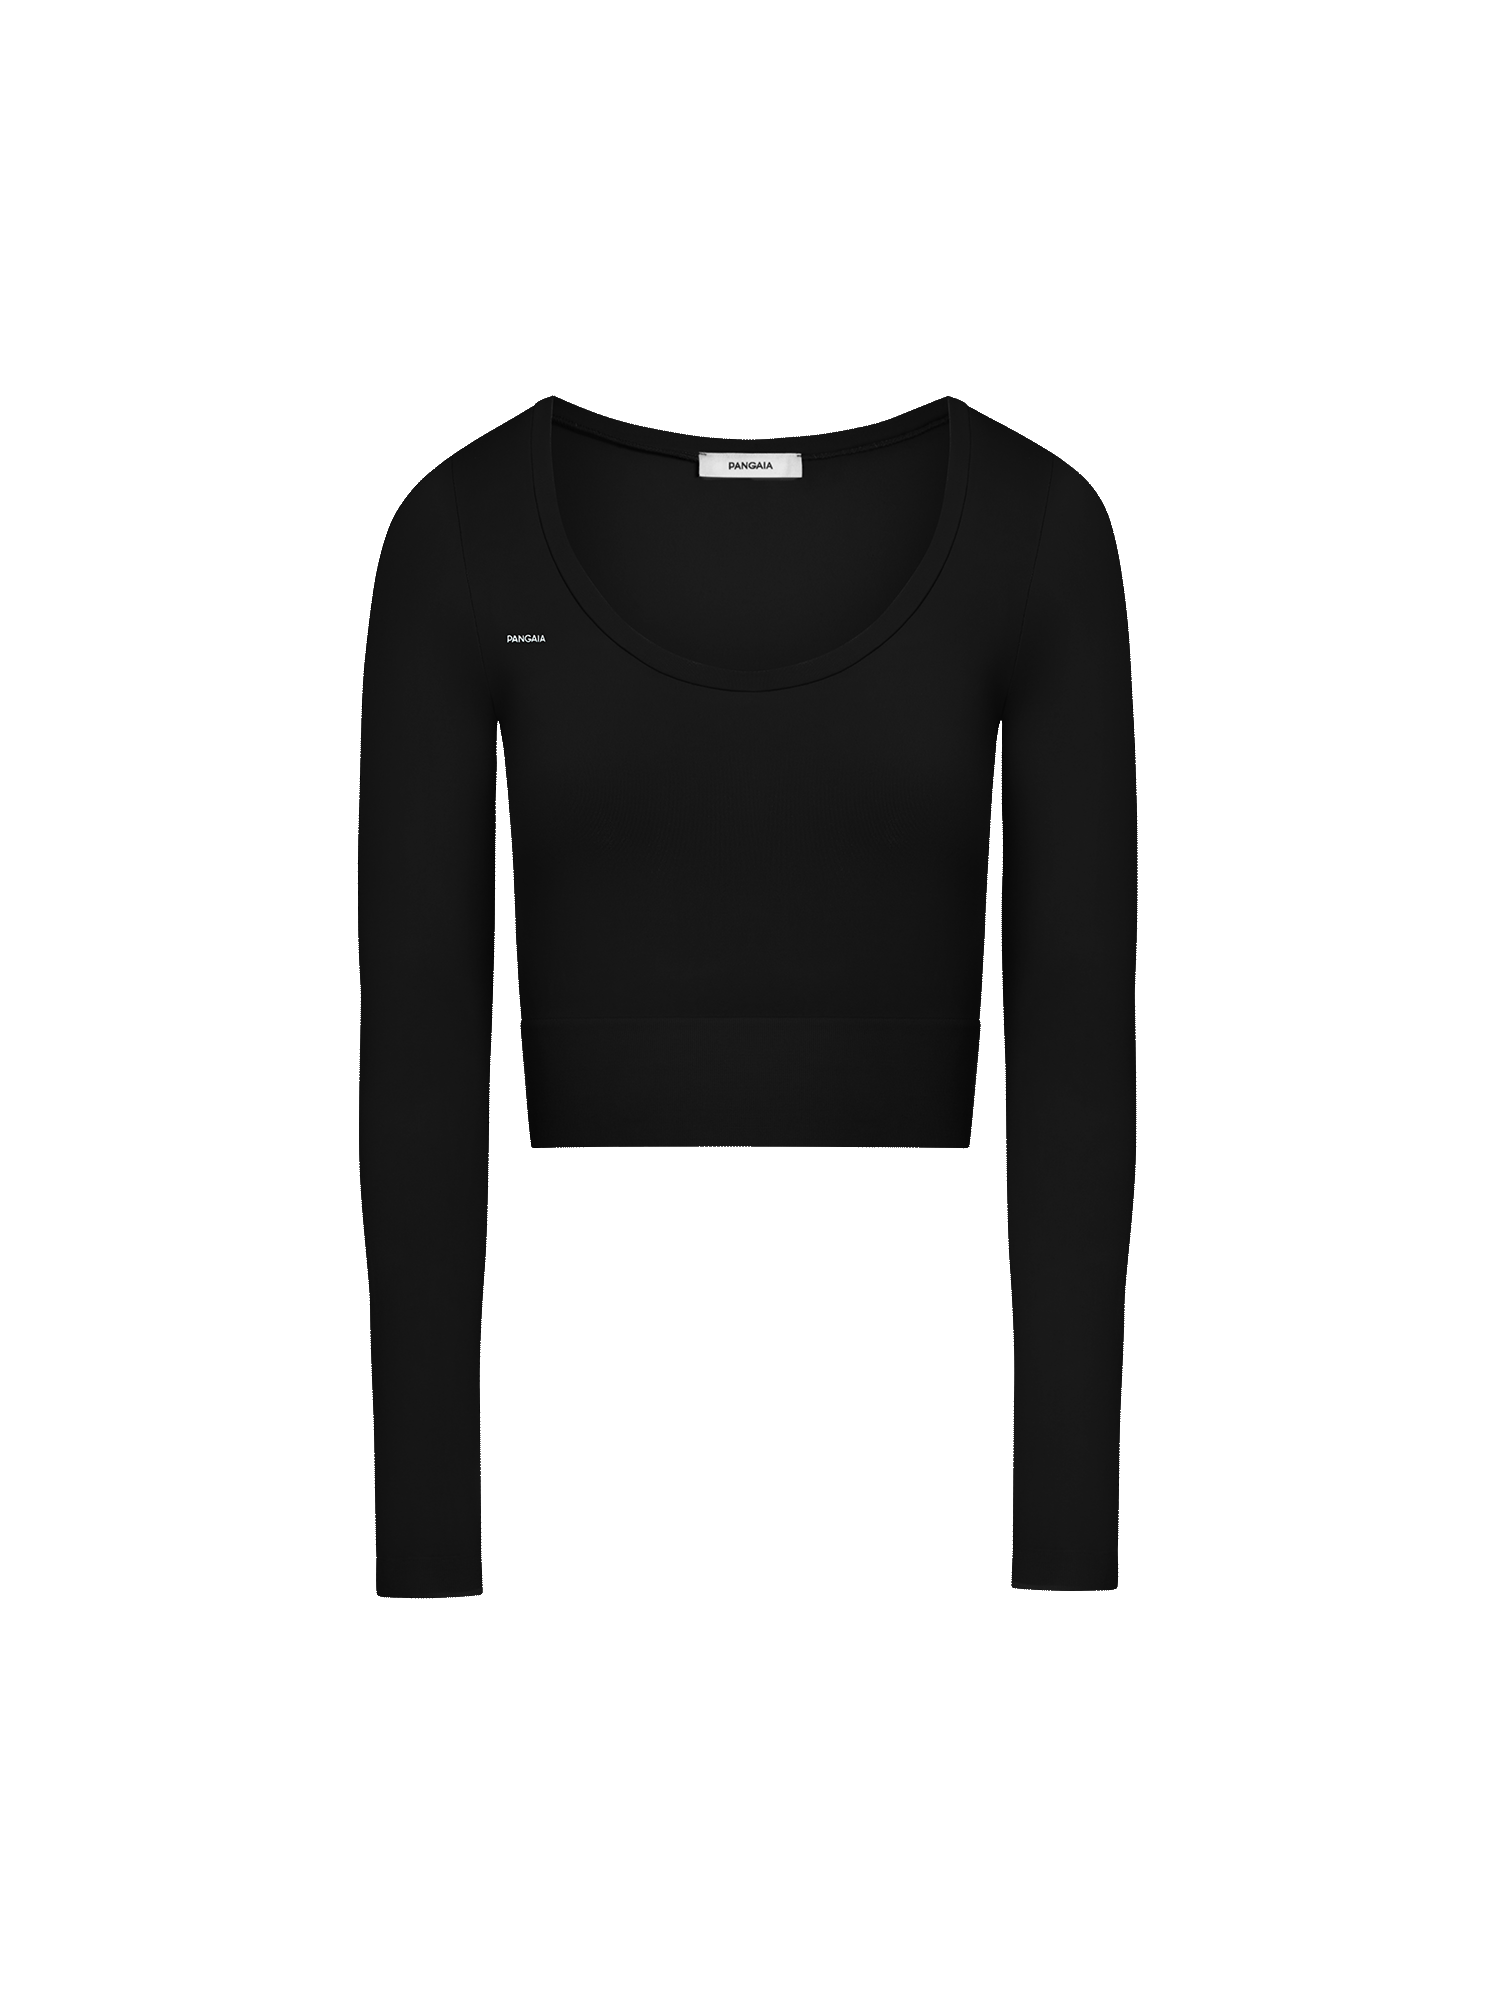 Women's Seamless Long Sleeve Crop Top - All In Motion™ Brown XL